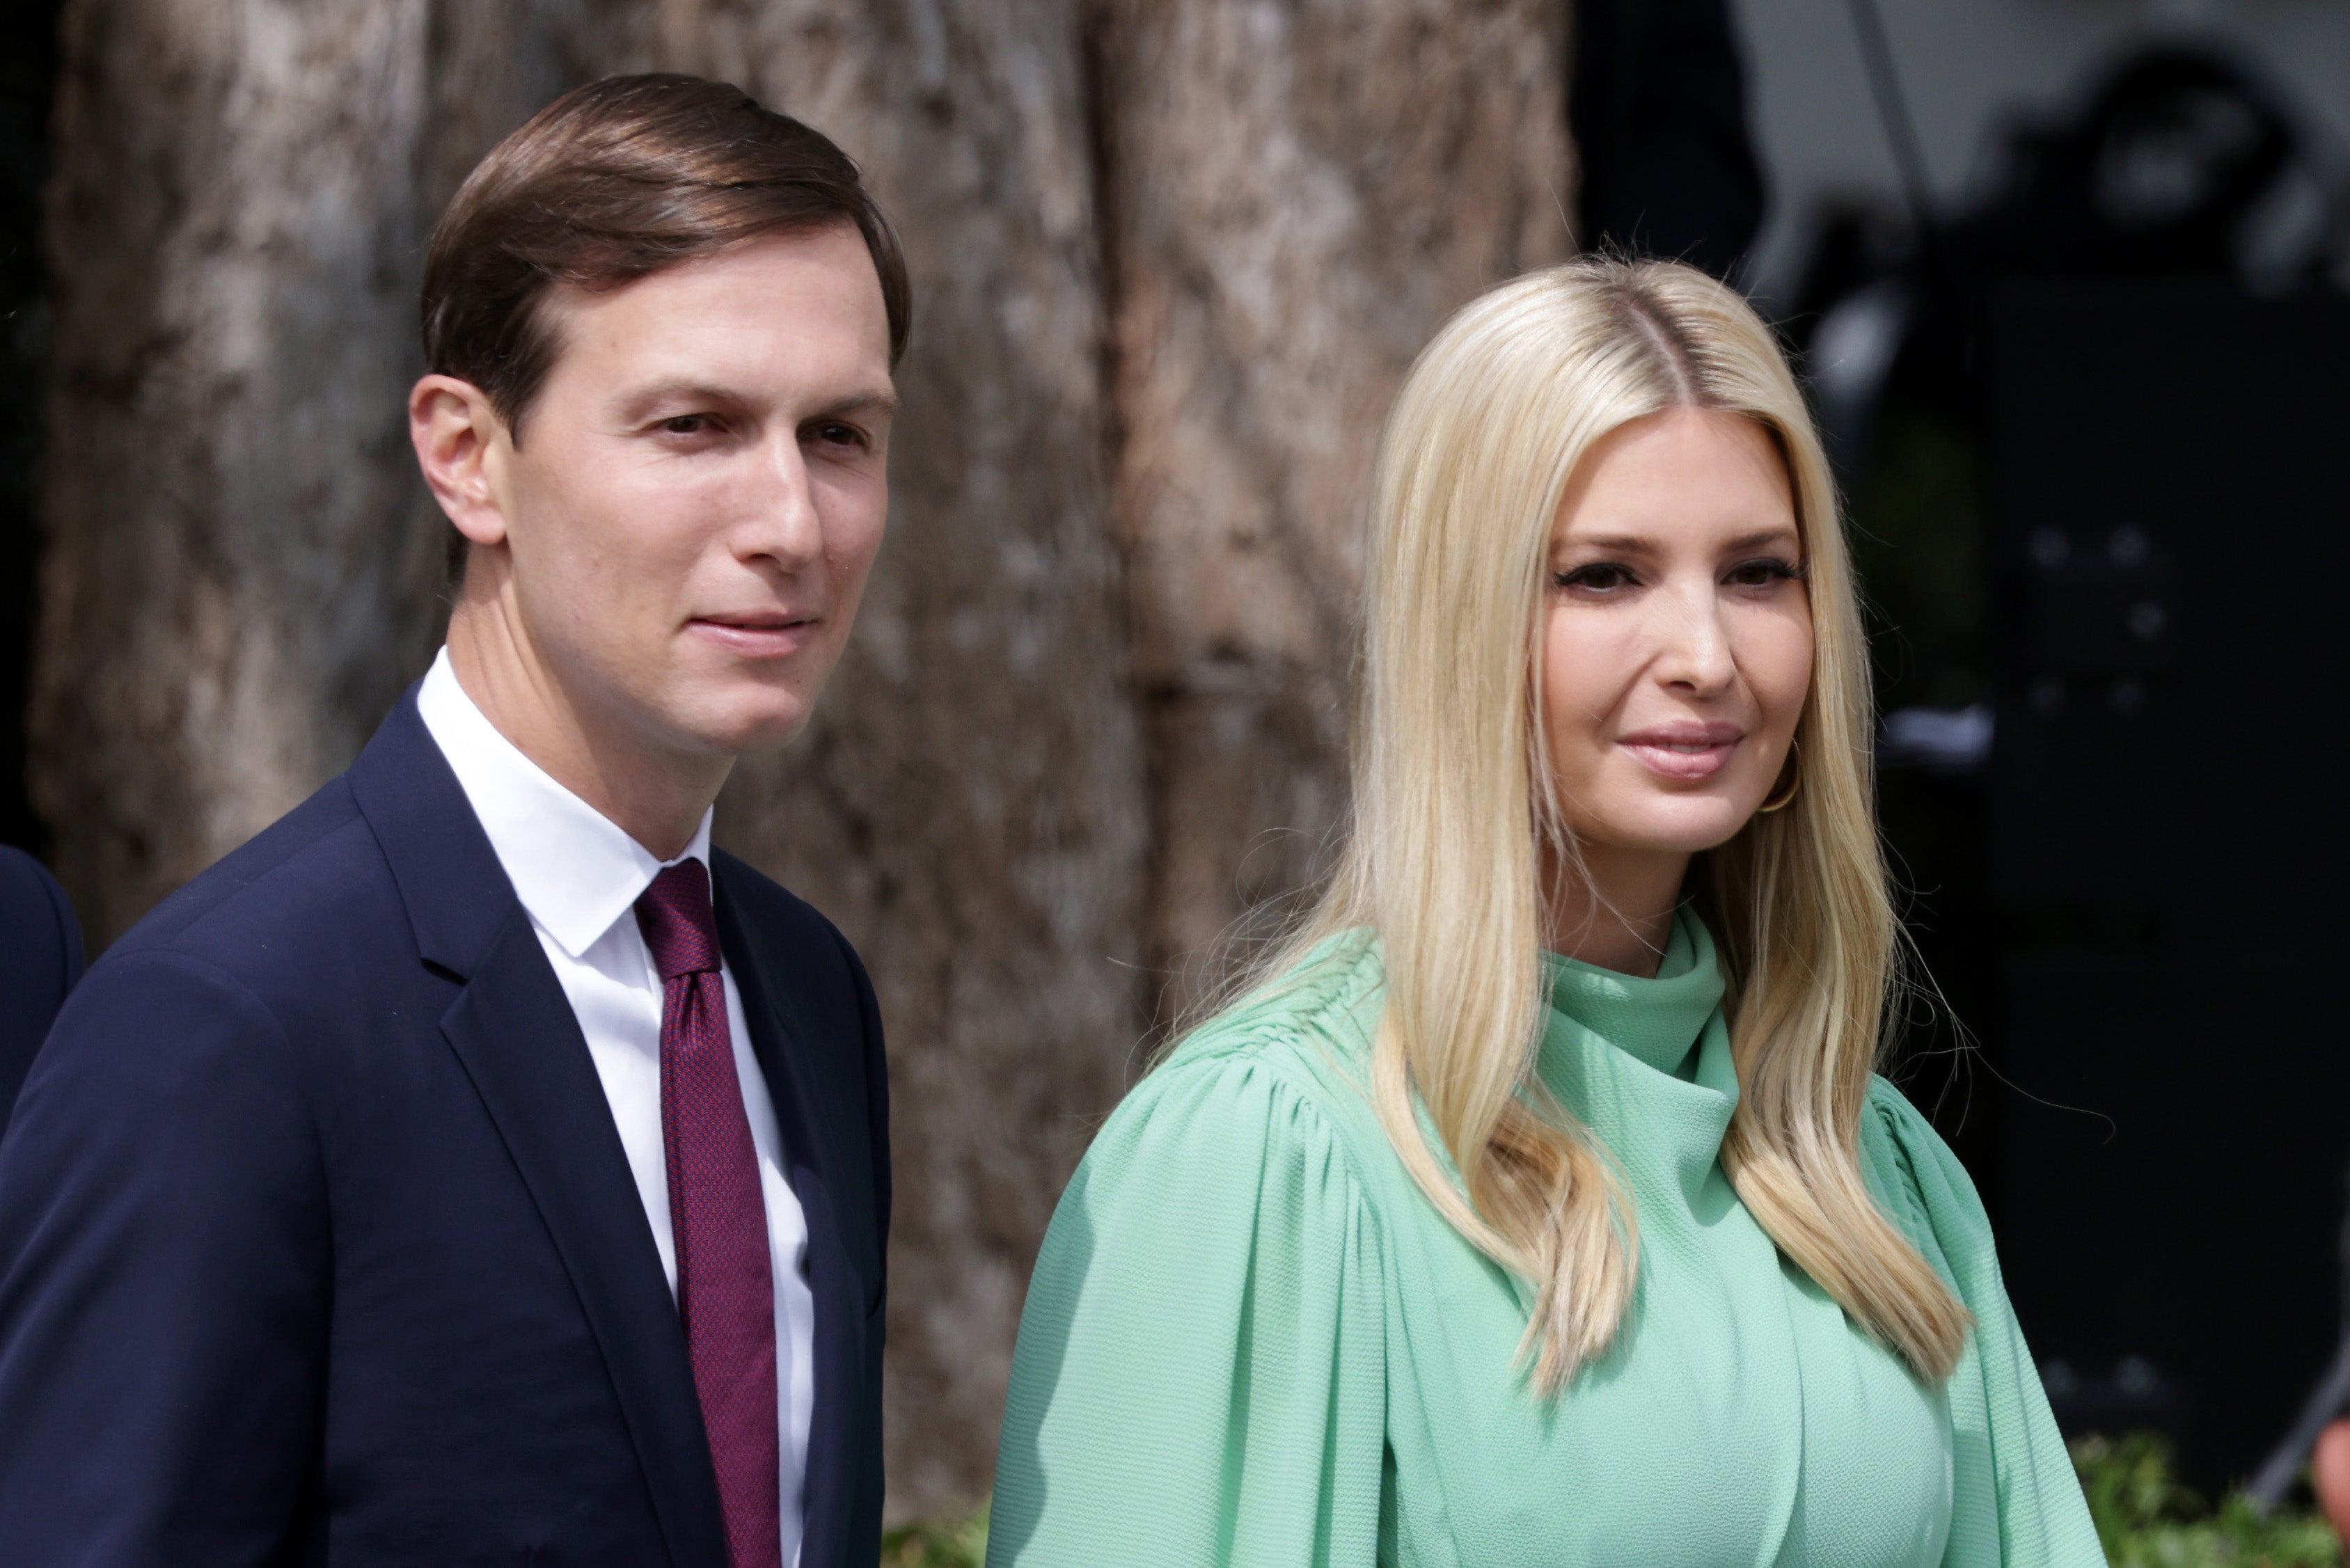 Ivanka Trump is diligently campaigning for her father, but the future is very uncertain